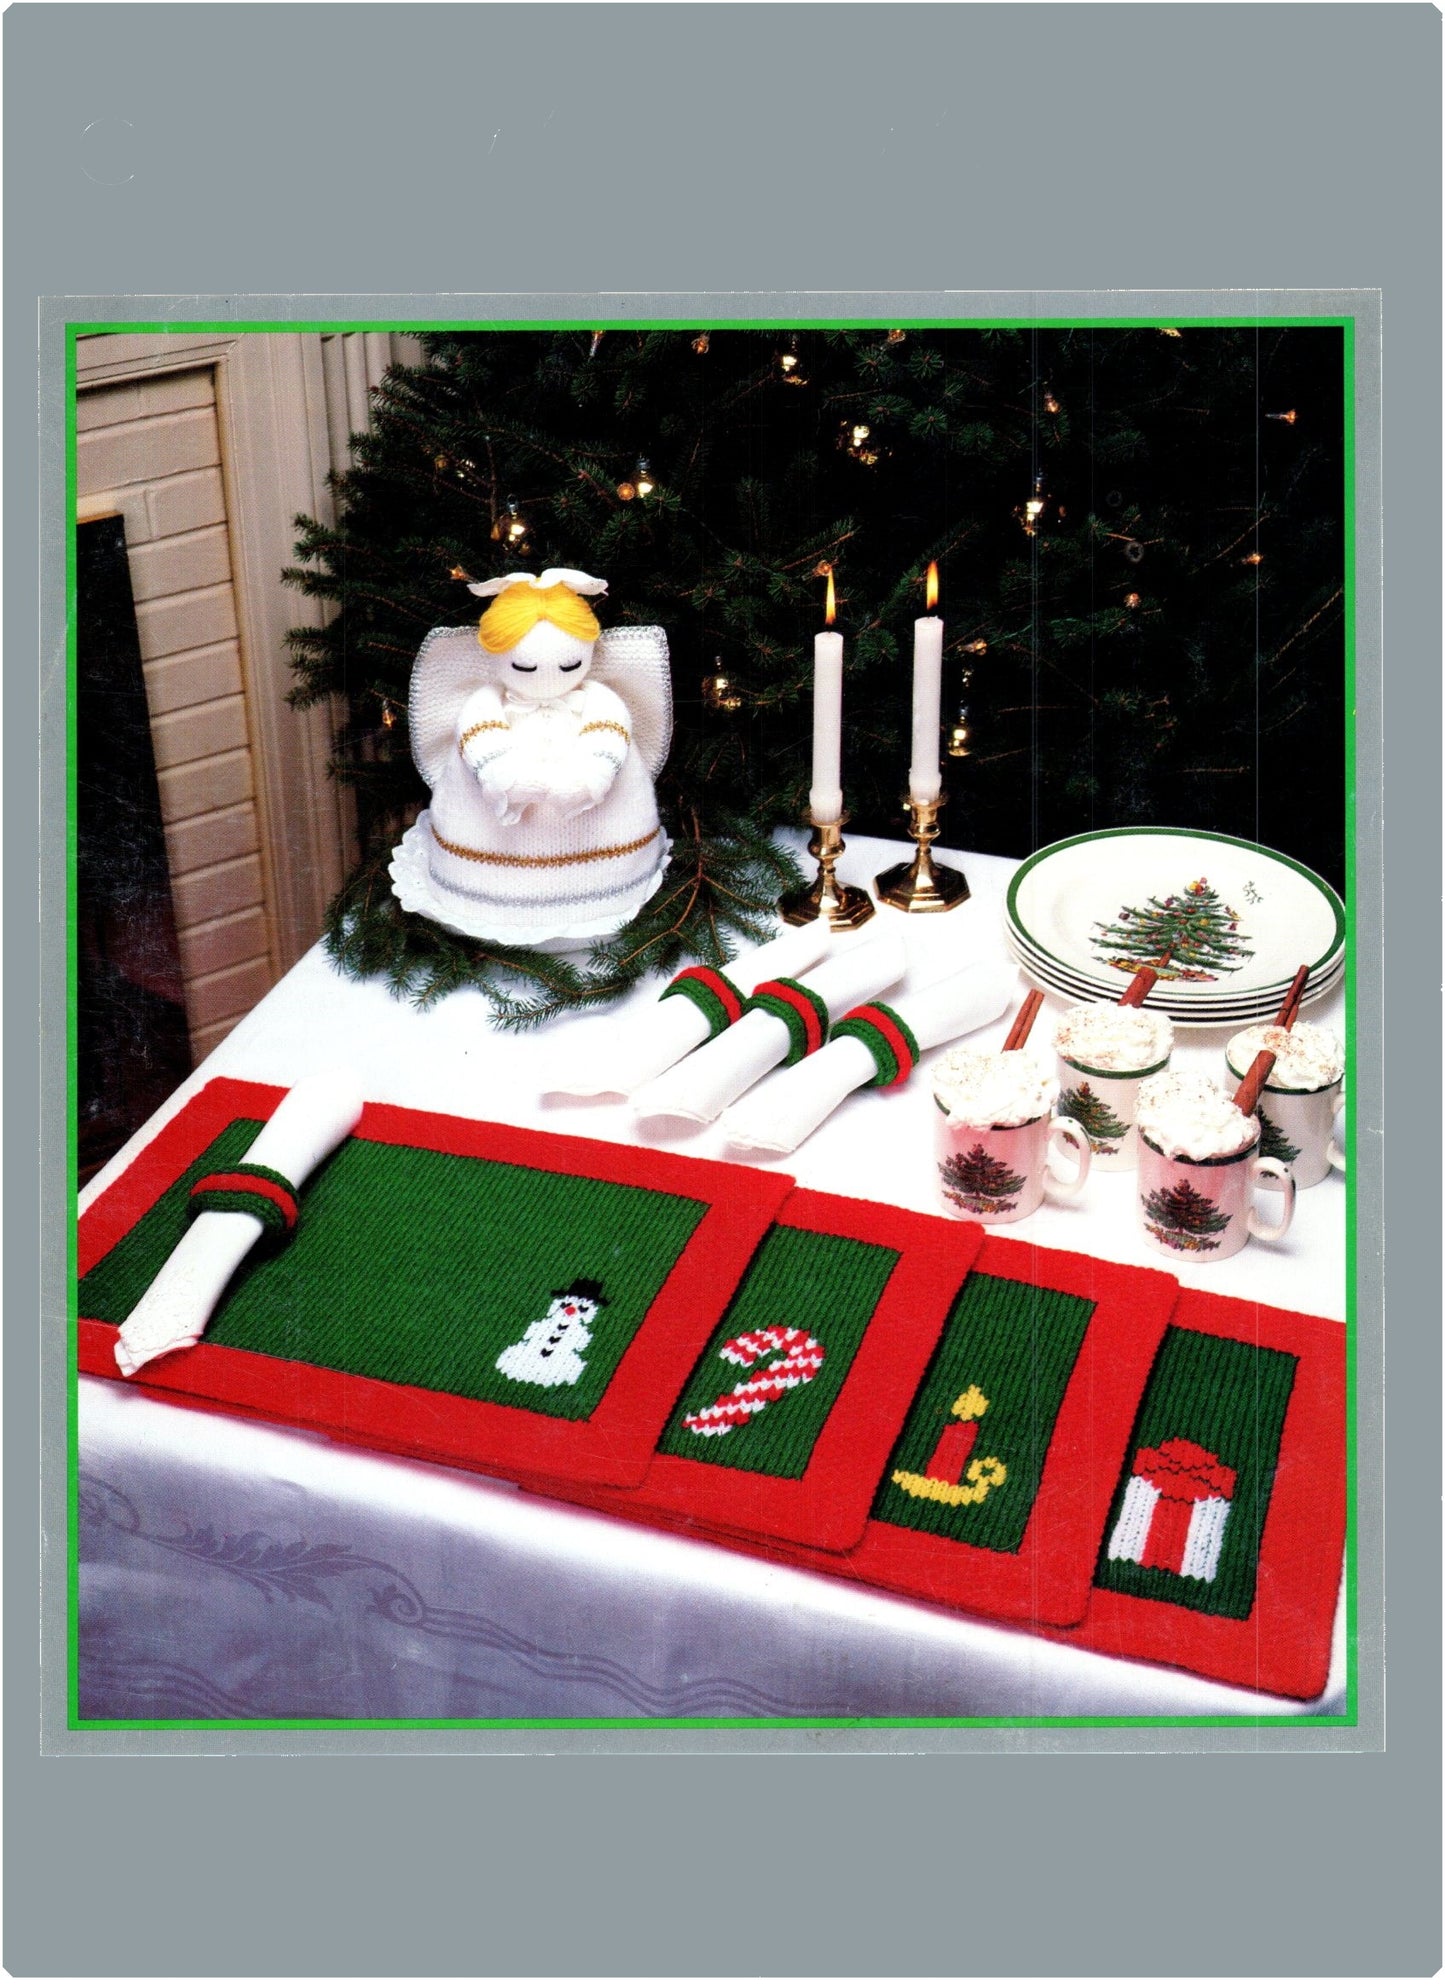 Vintage Knit Christmas Table Set Pattern Placemats Angel Centerpiece Stockings Knitted PDF Pattern - At Grandma's Table